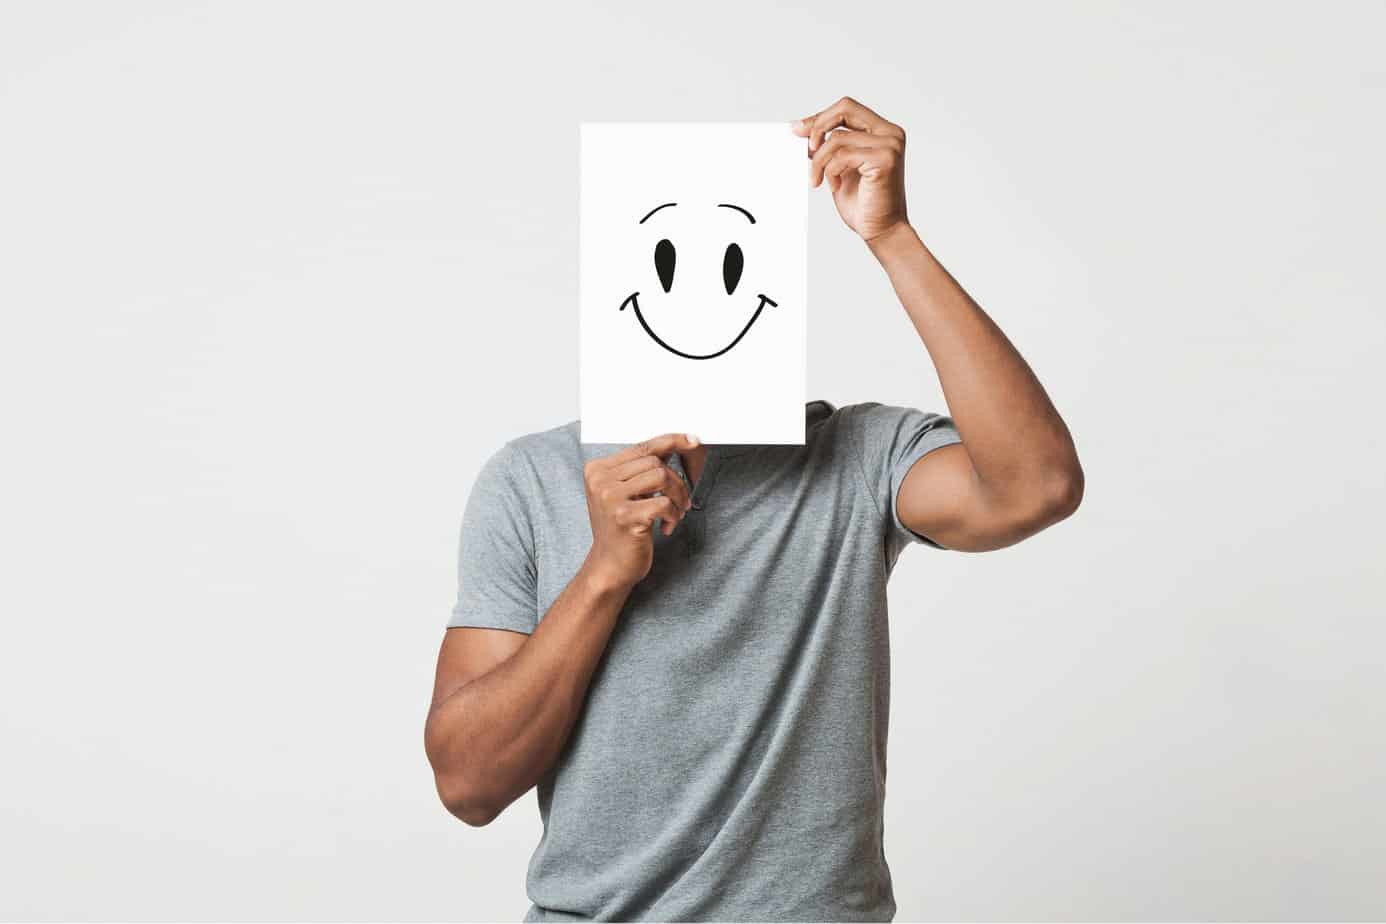 Putting smiling face on. Black man holding paper with smiley face printed on, happiness and joy concept